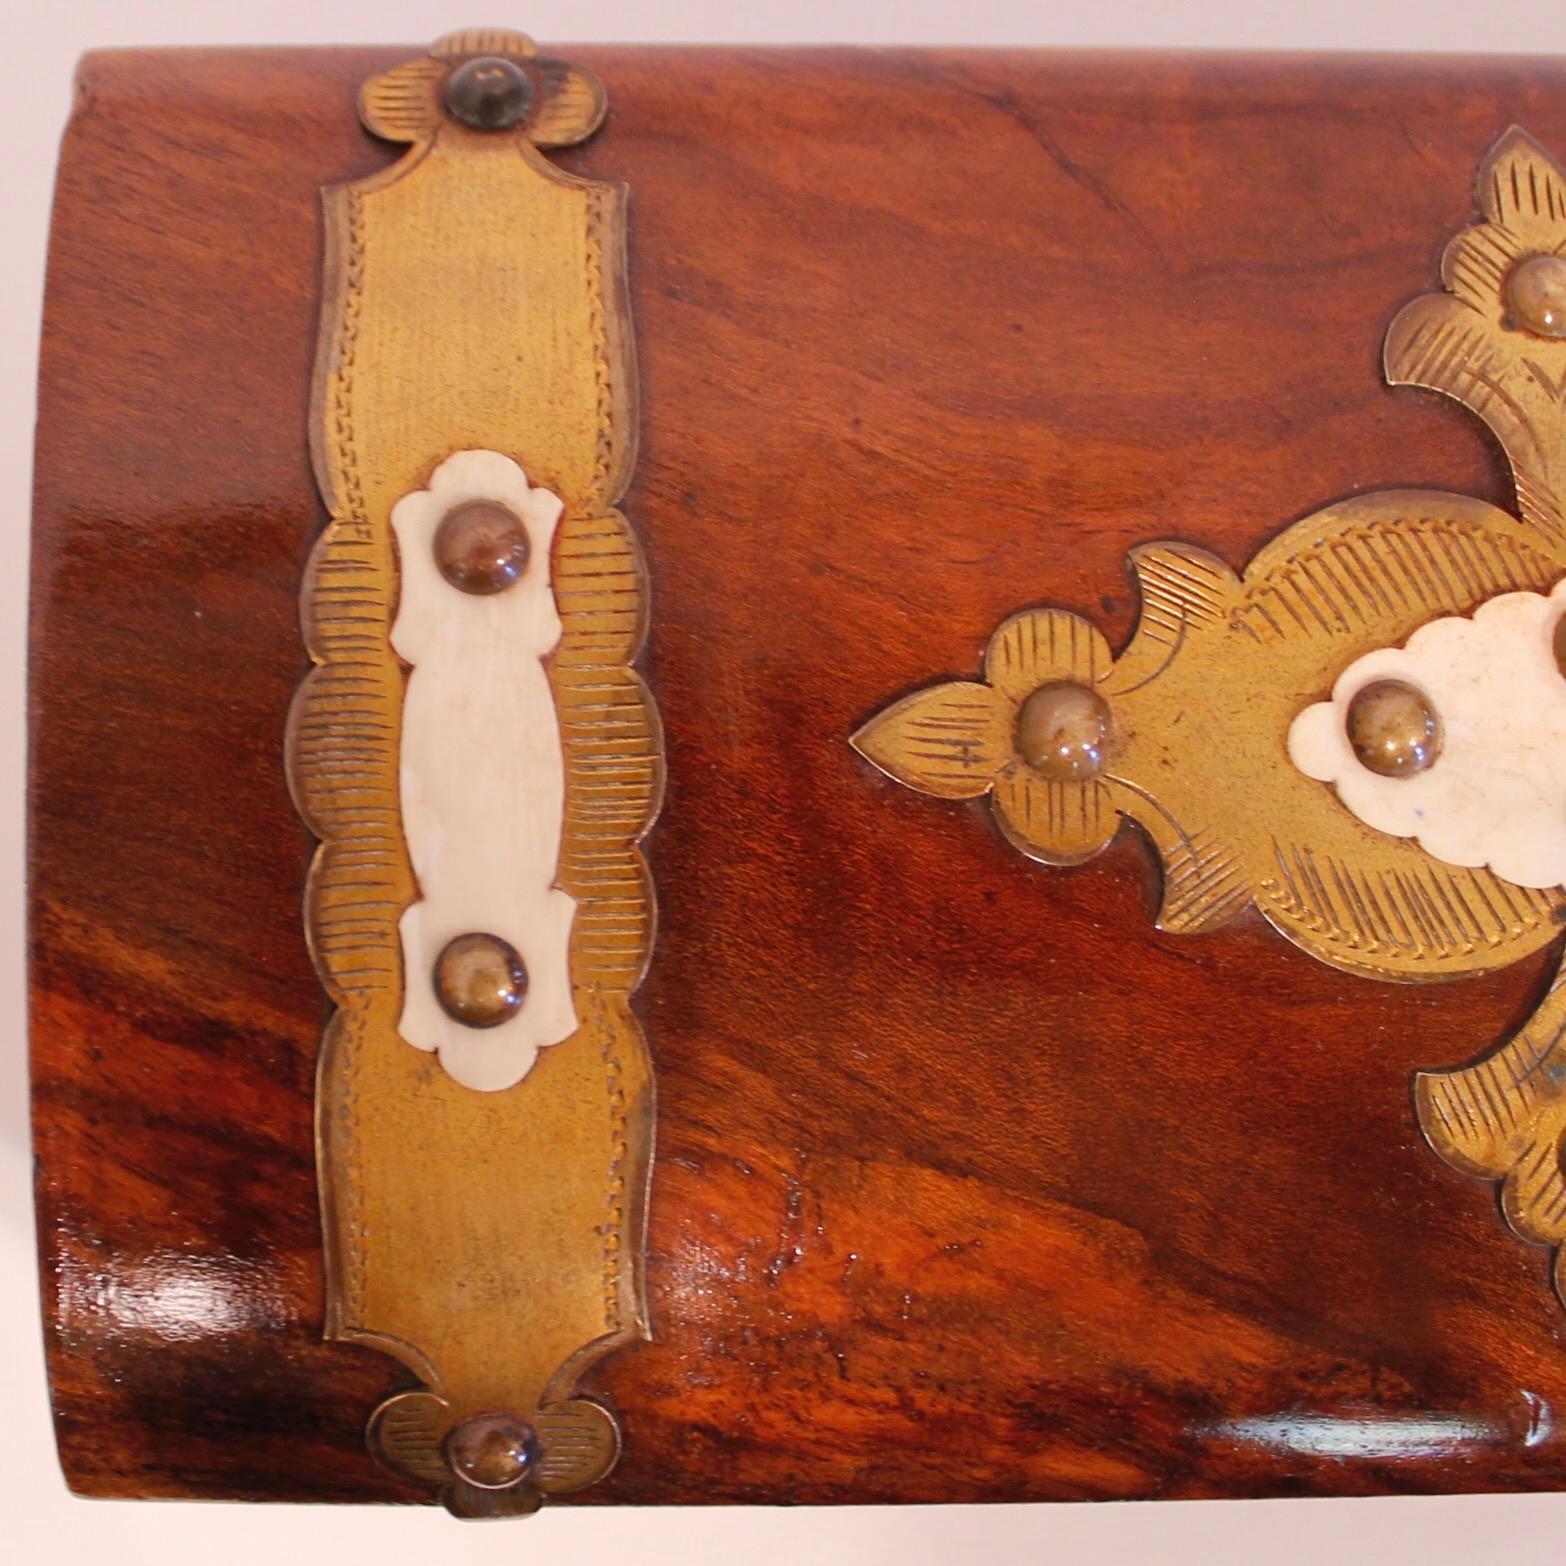 English Burl Walnut Tea Caddy With Decorative Brass Mounts In Good Condition For Sale In Free Union, VA